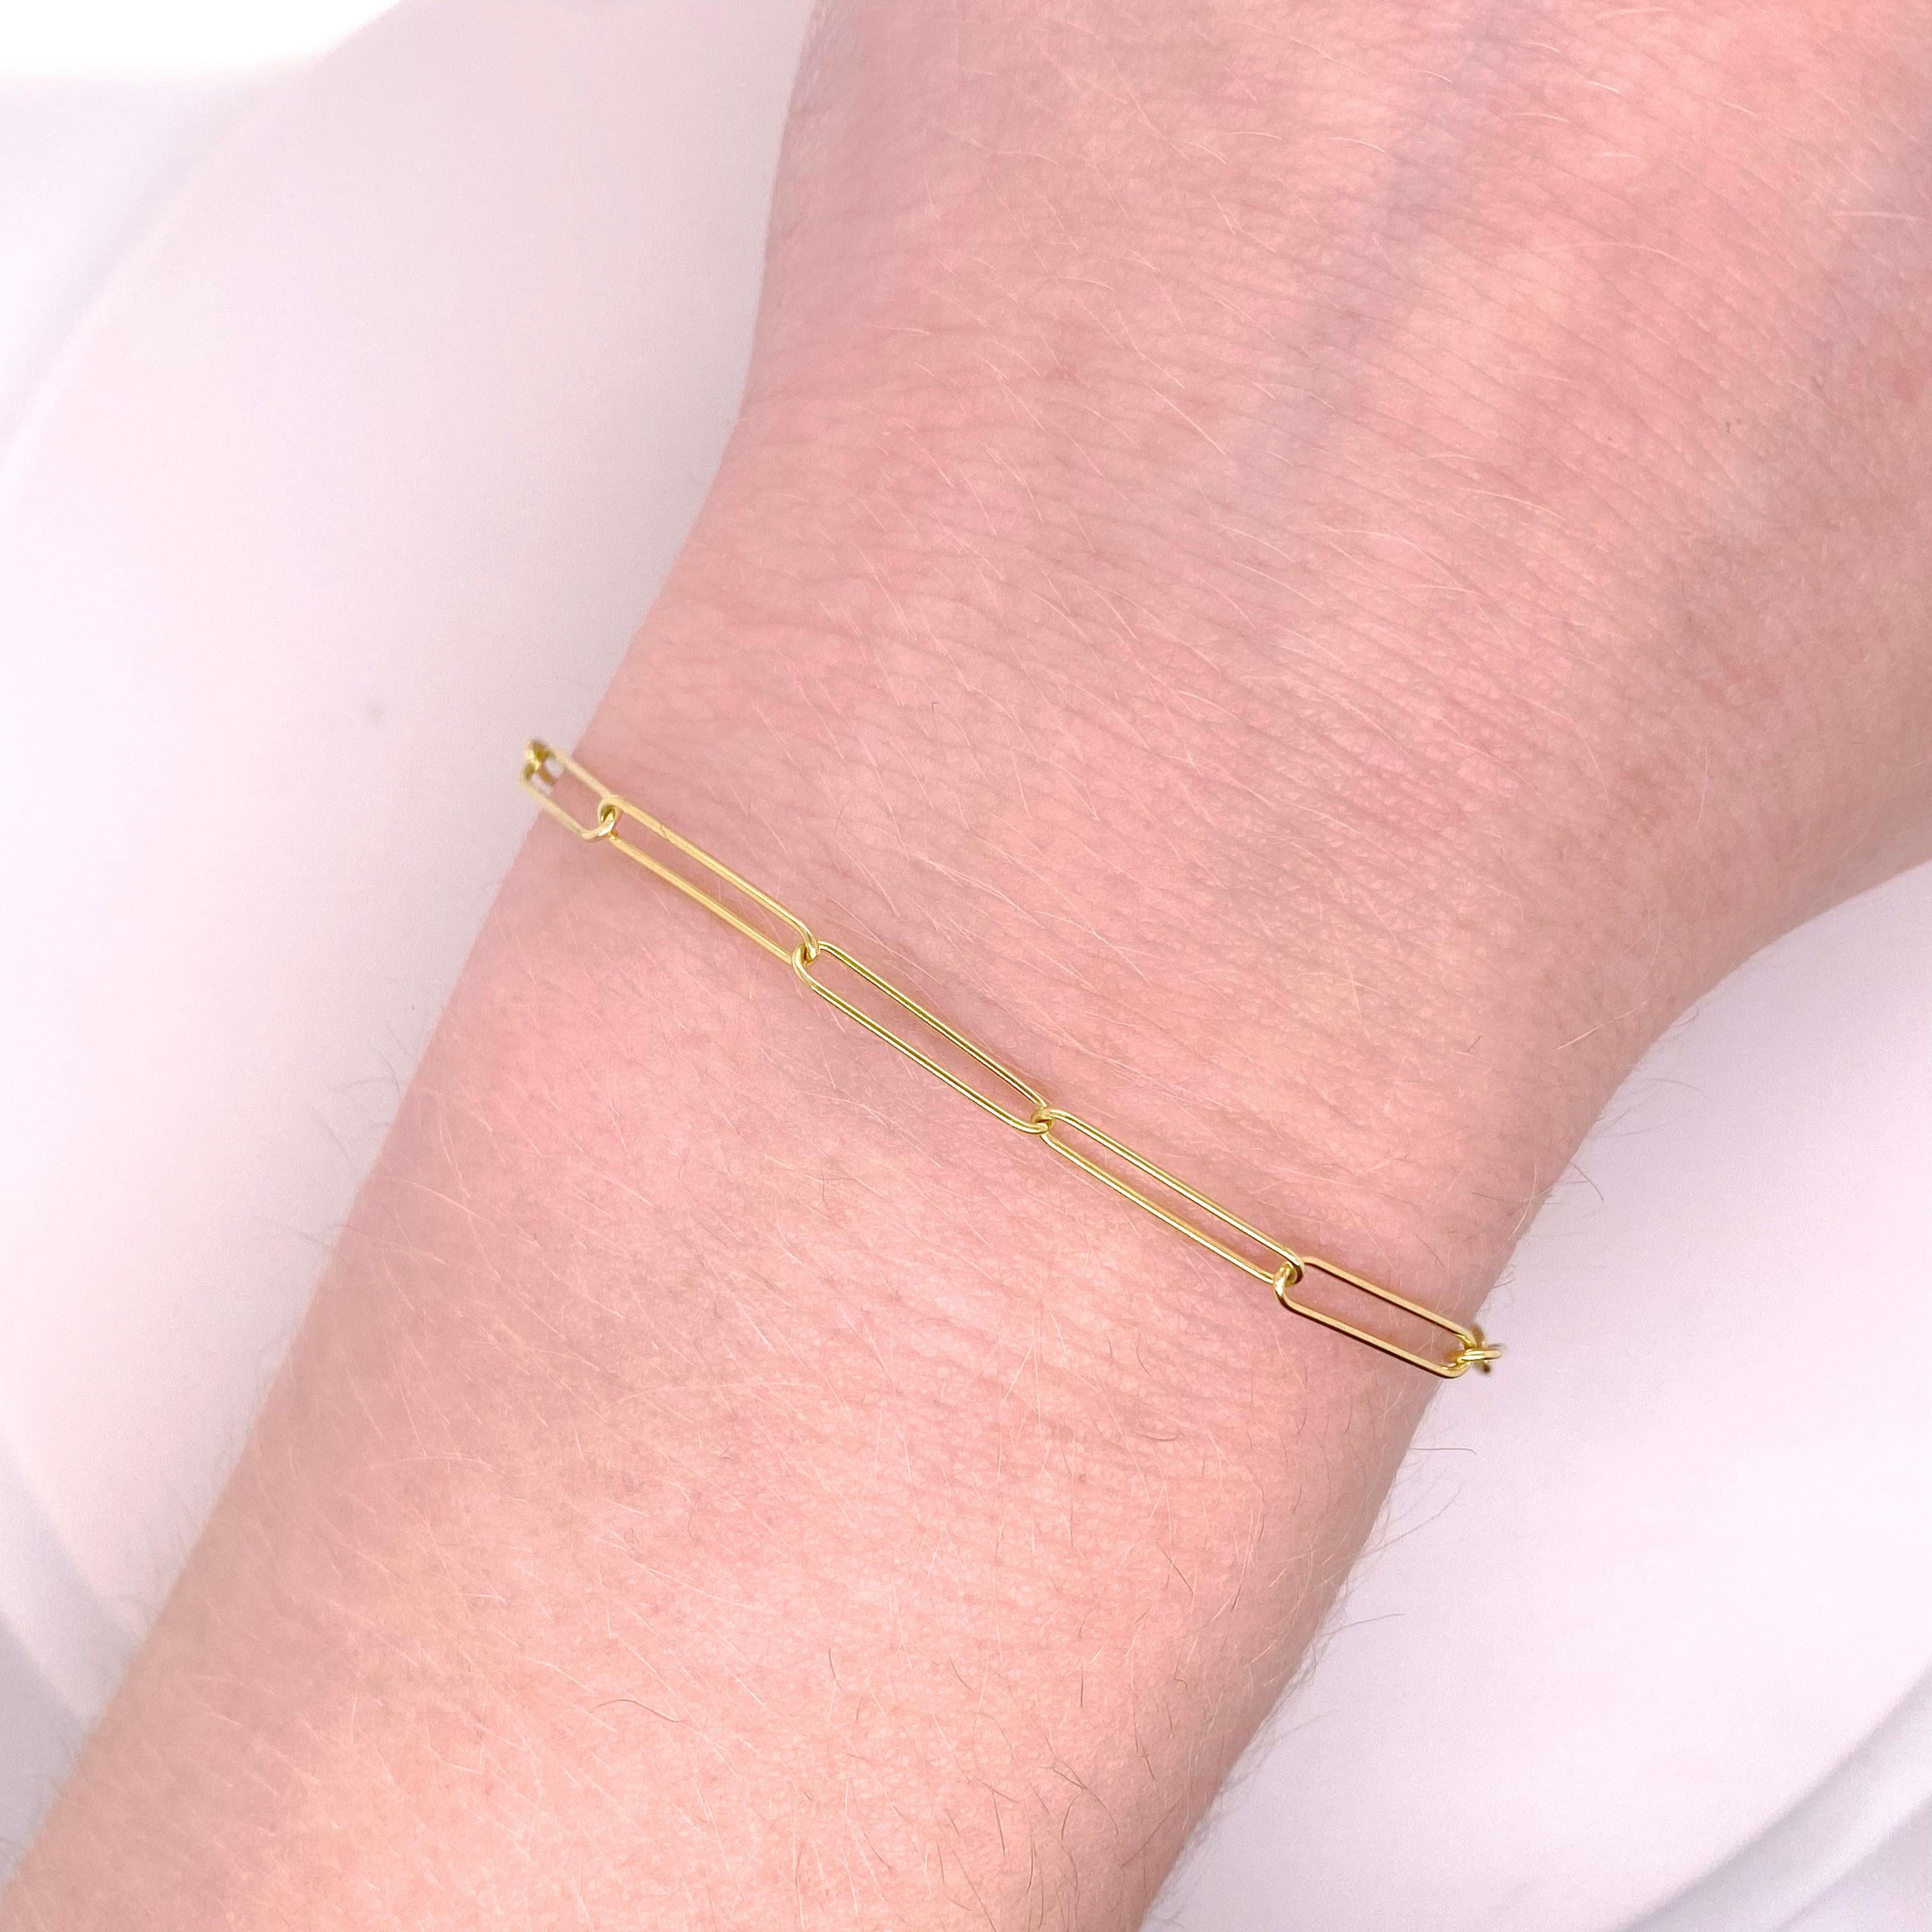 how to put on a bracelet with a paperclip